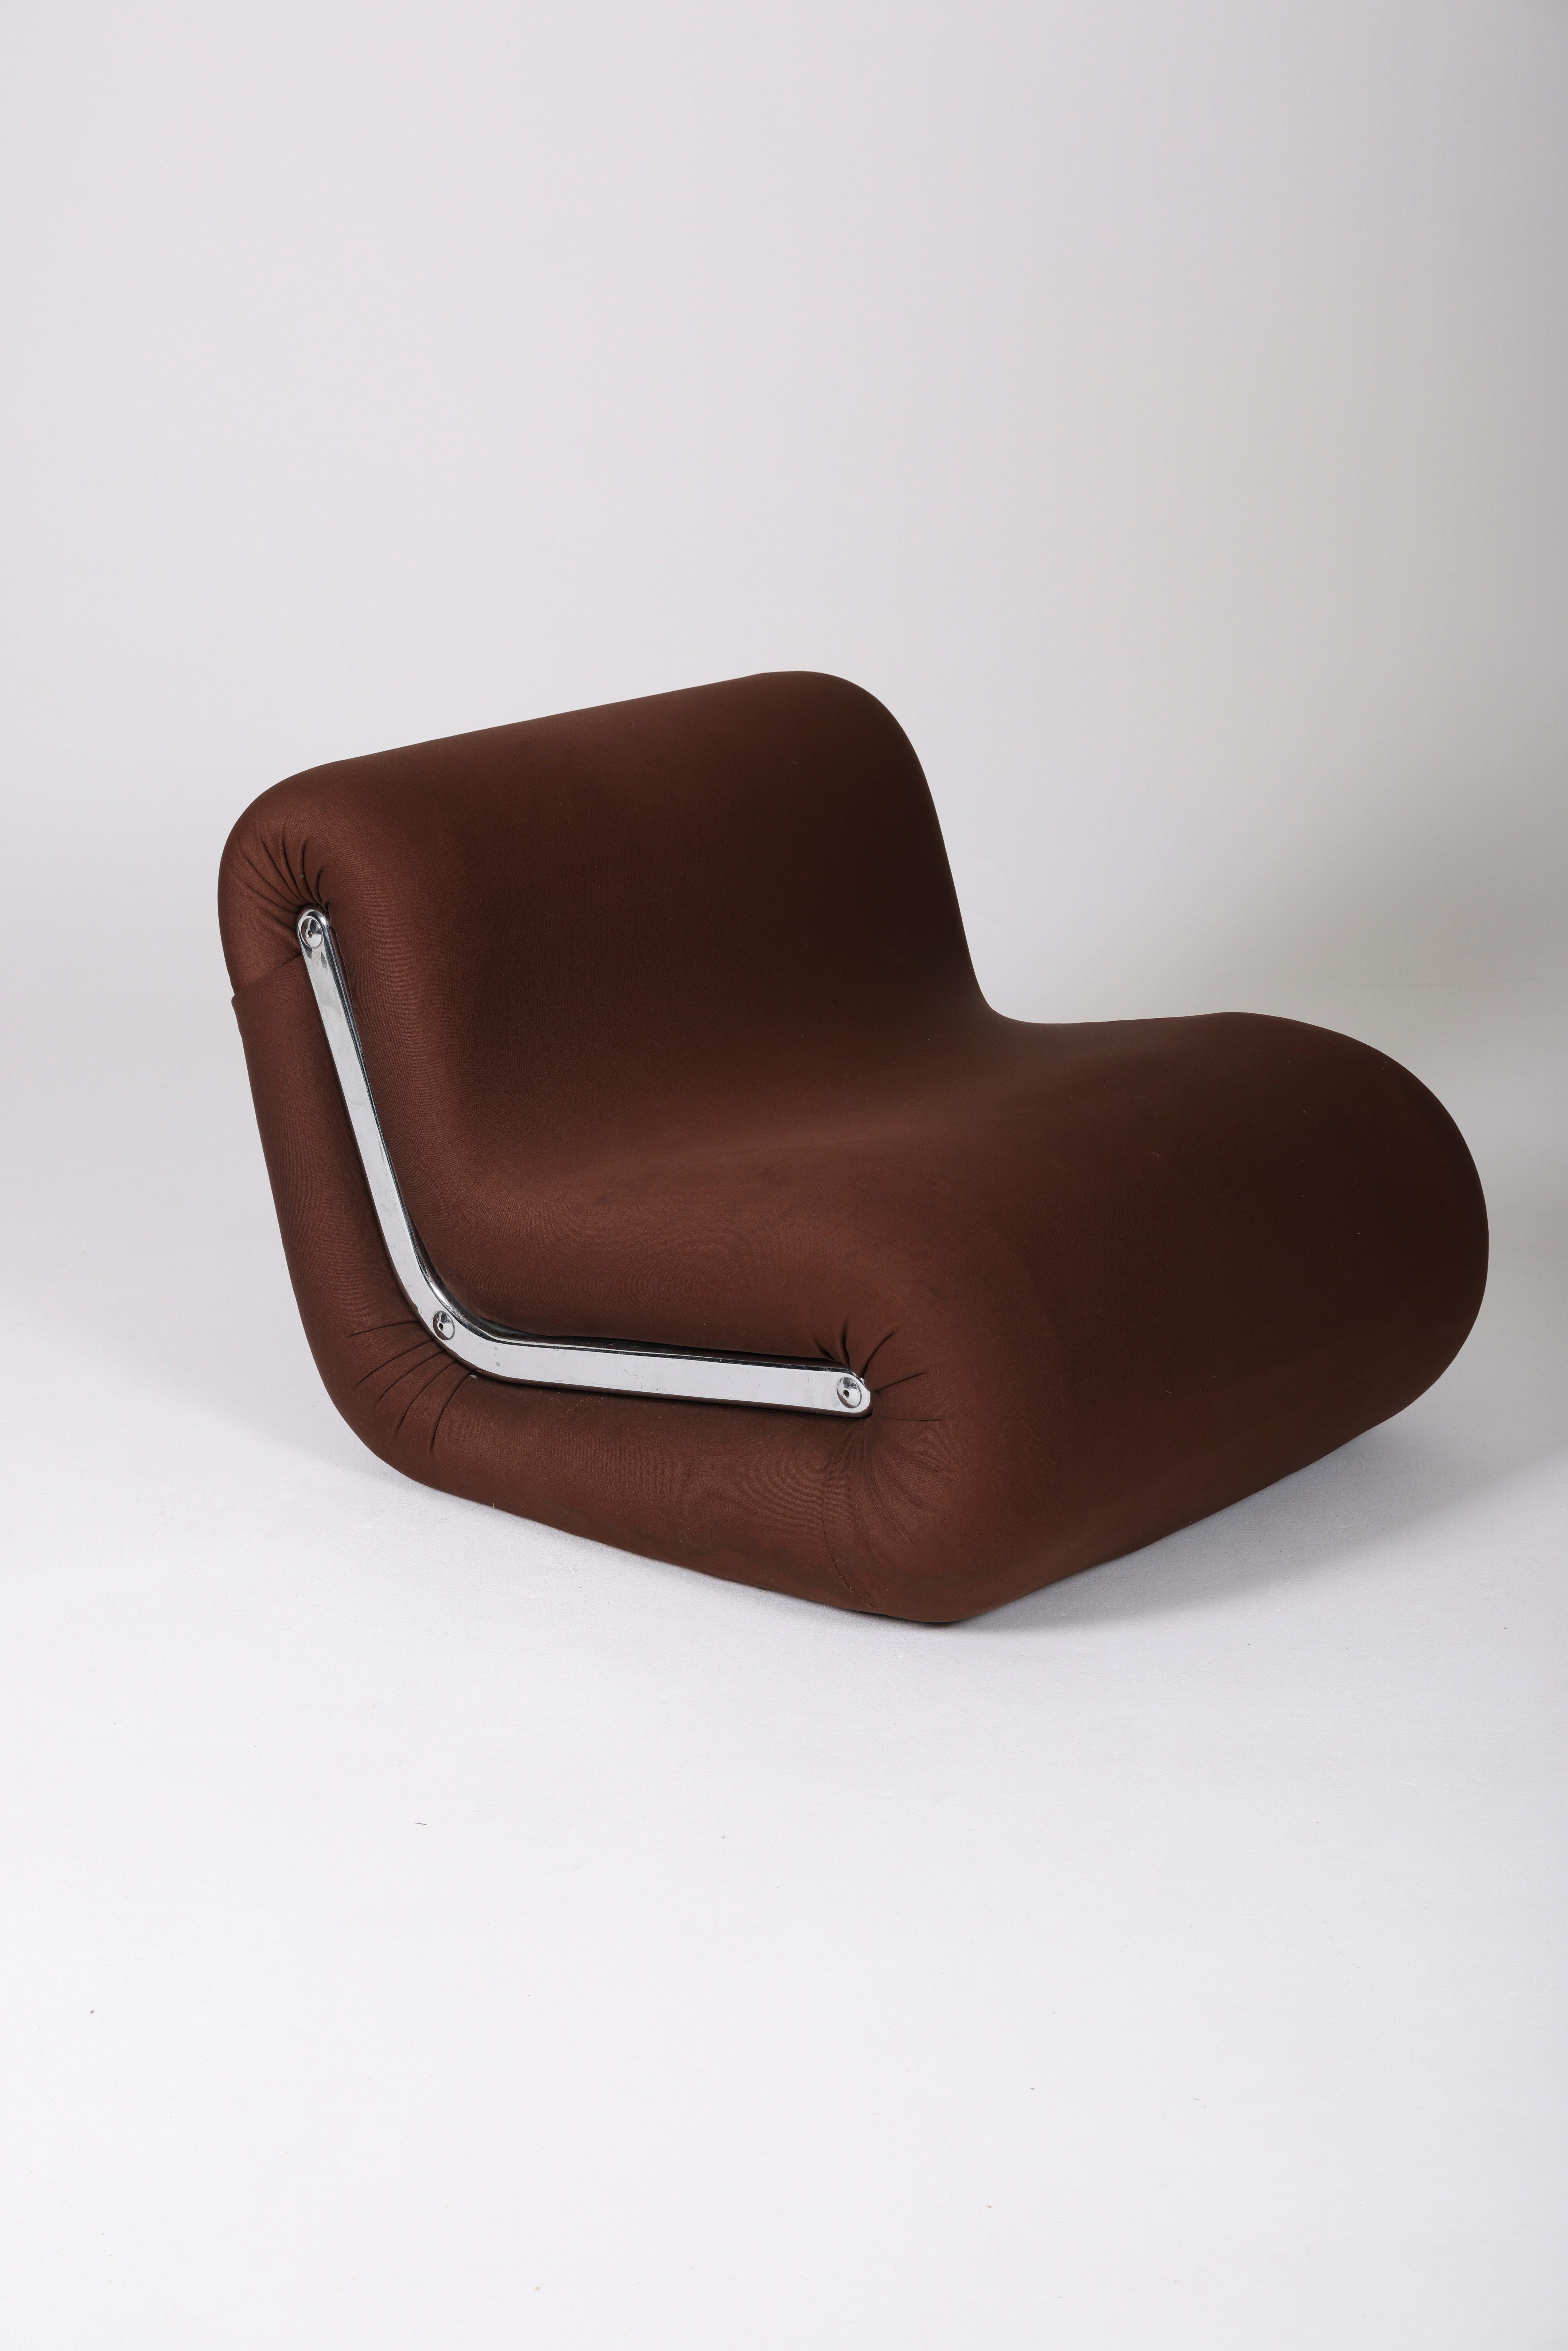 Boomerang armchair by Italian designer Rodolfo Bonetto, from the 1960s. Metal frame, brown fabric upholstery, and chrome metal detailing on each side. Some fabric tears. 2 armchairs availables.
LP723/LP724